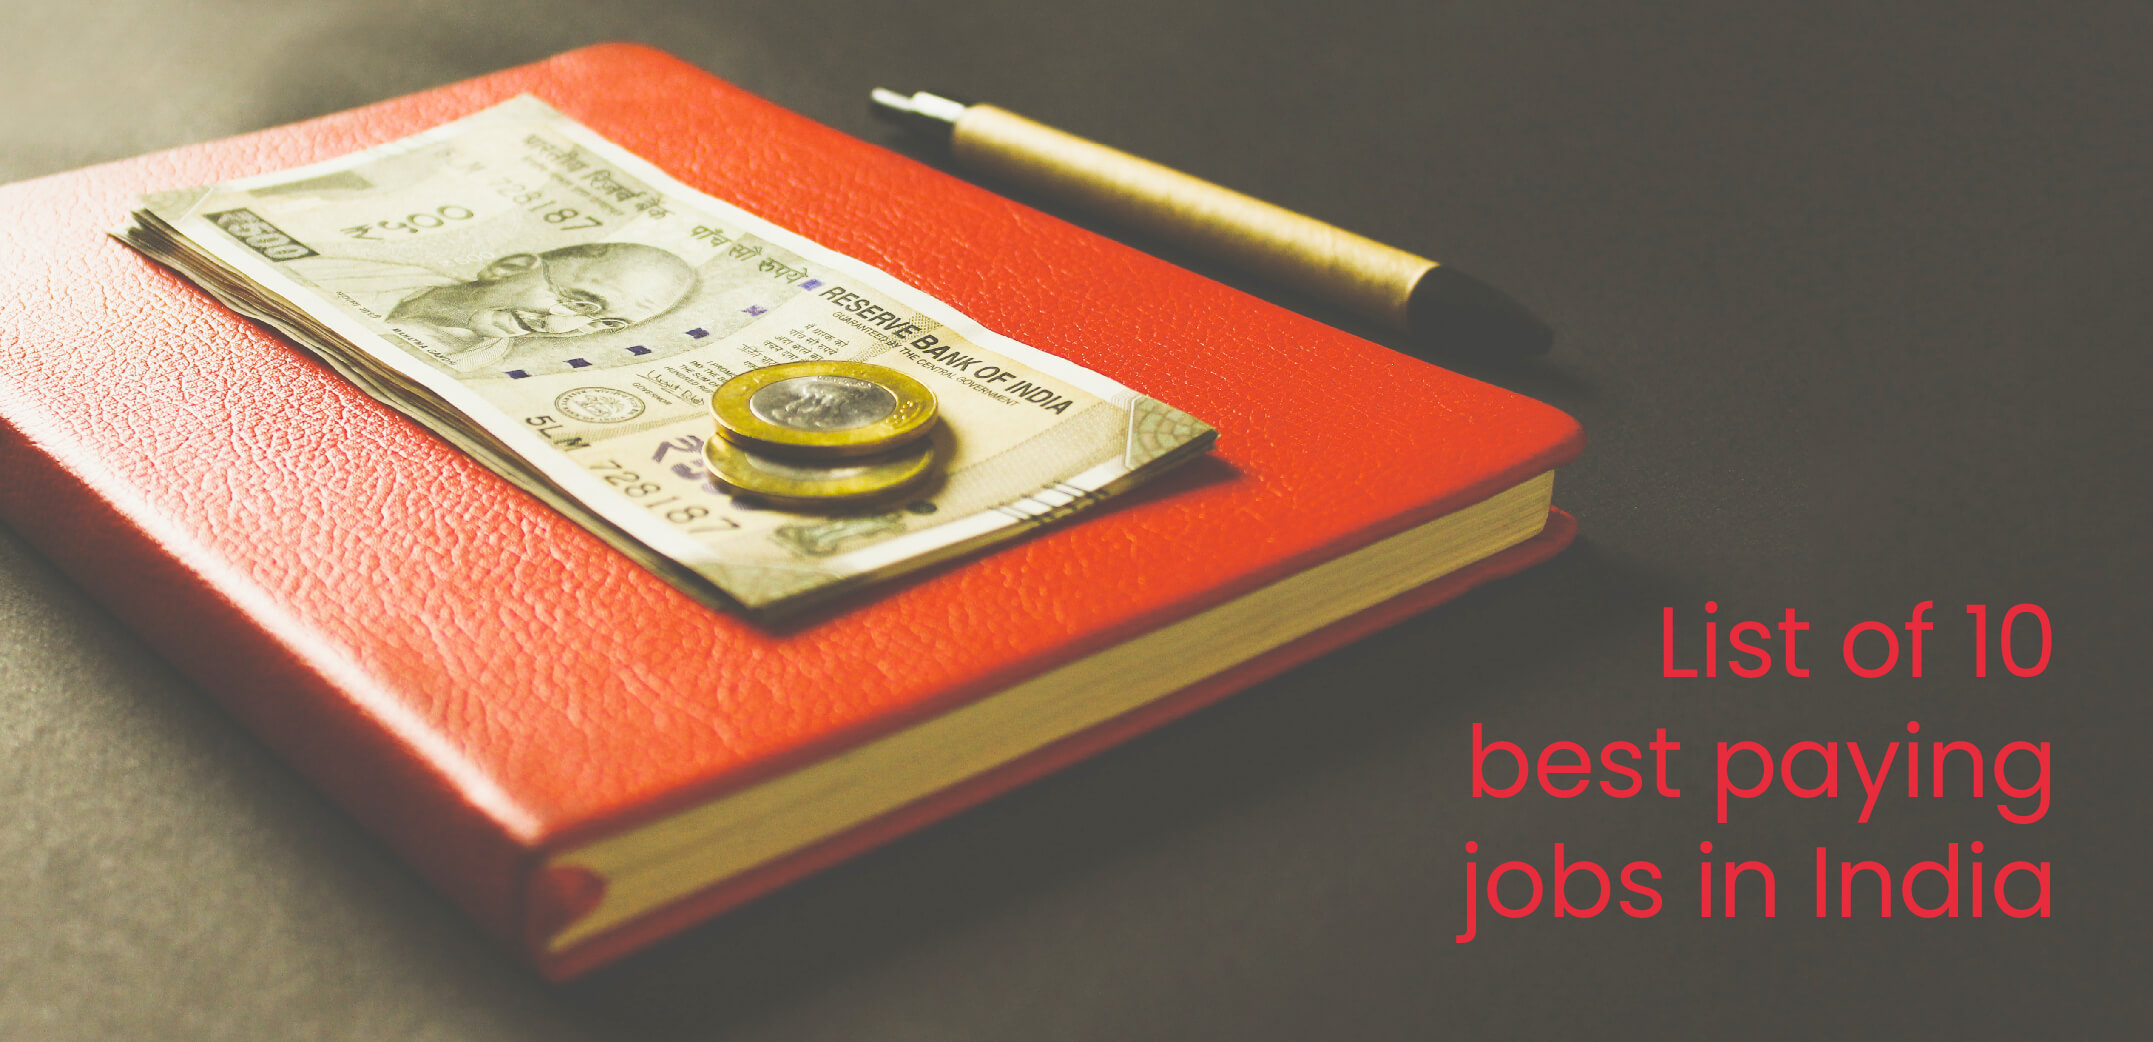 List of 10 best paying jobs in India